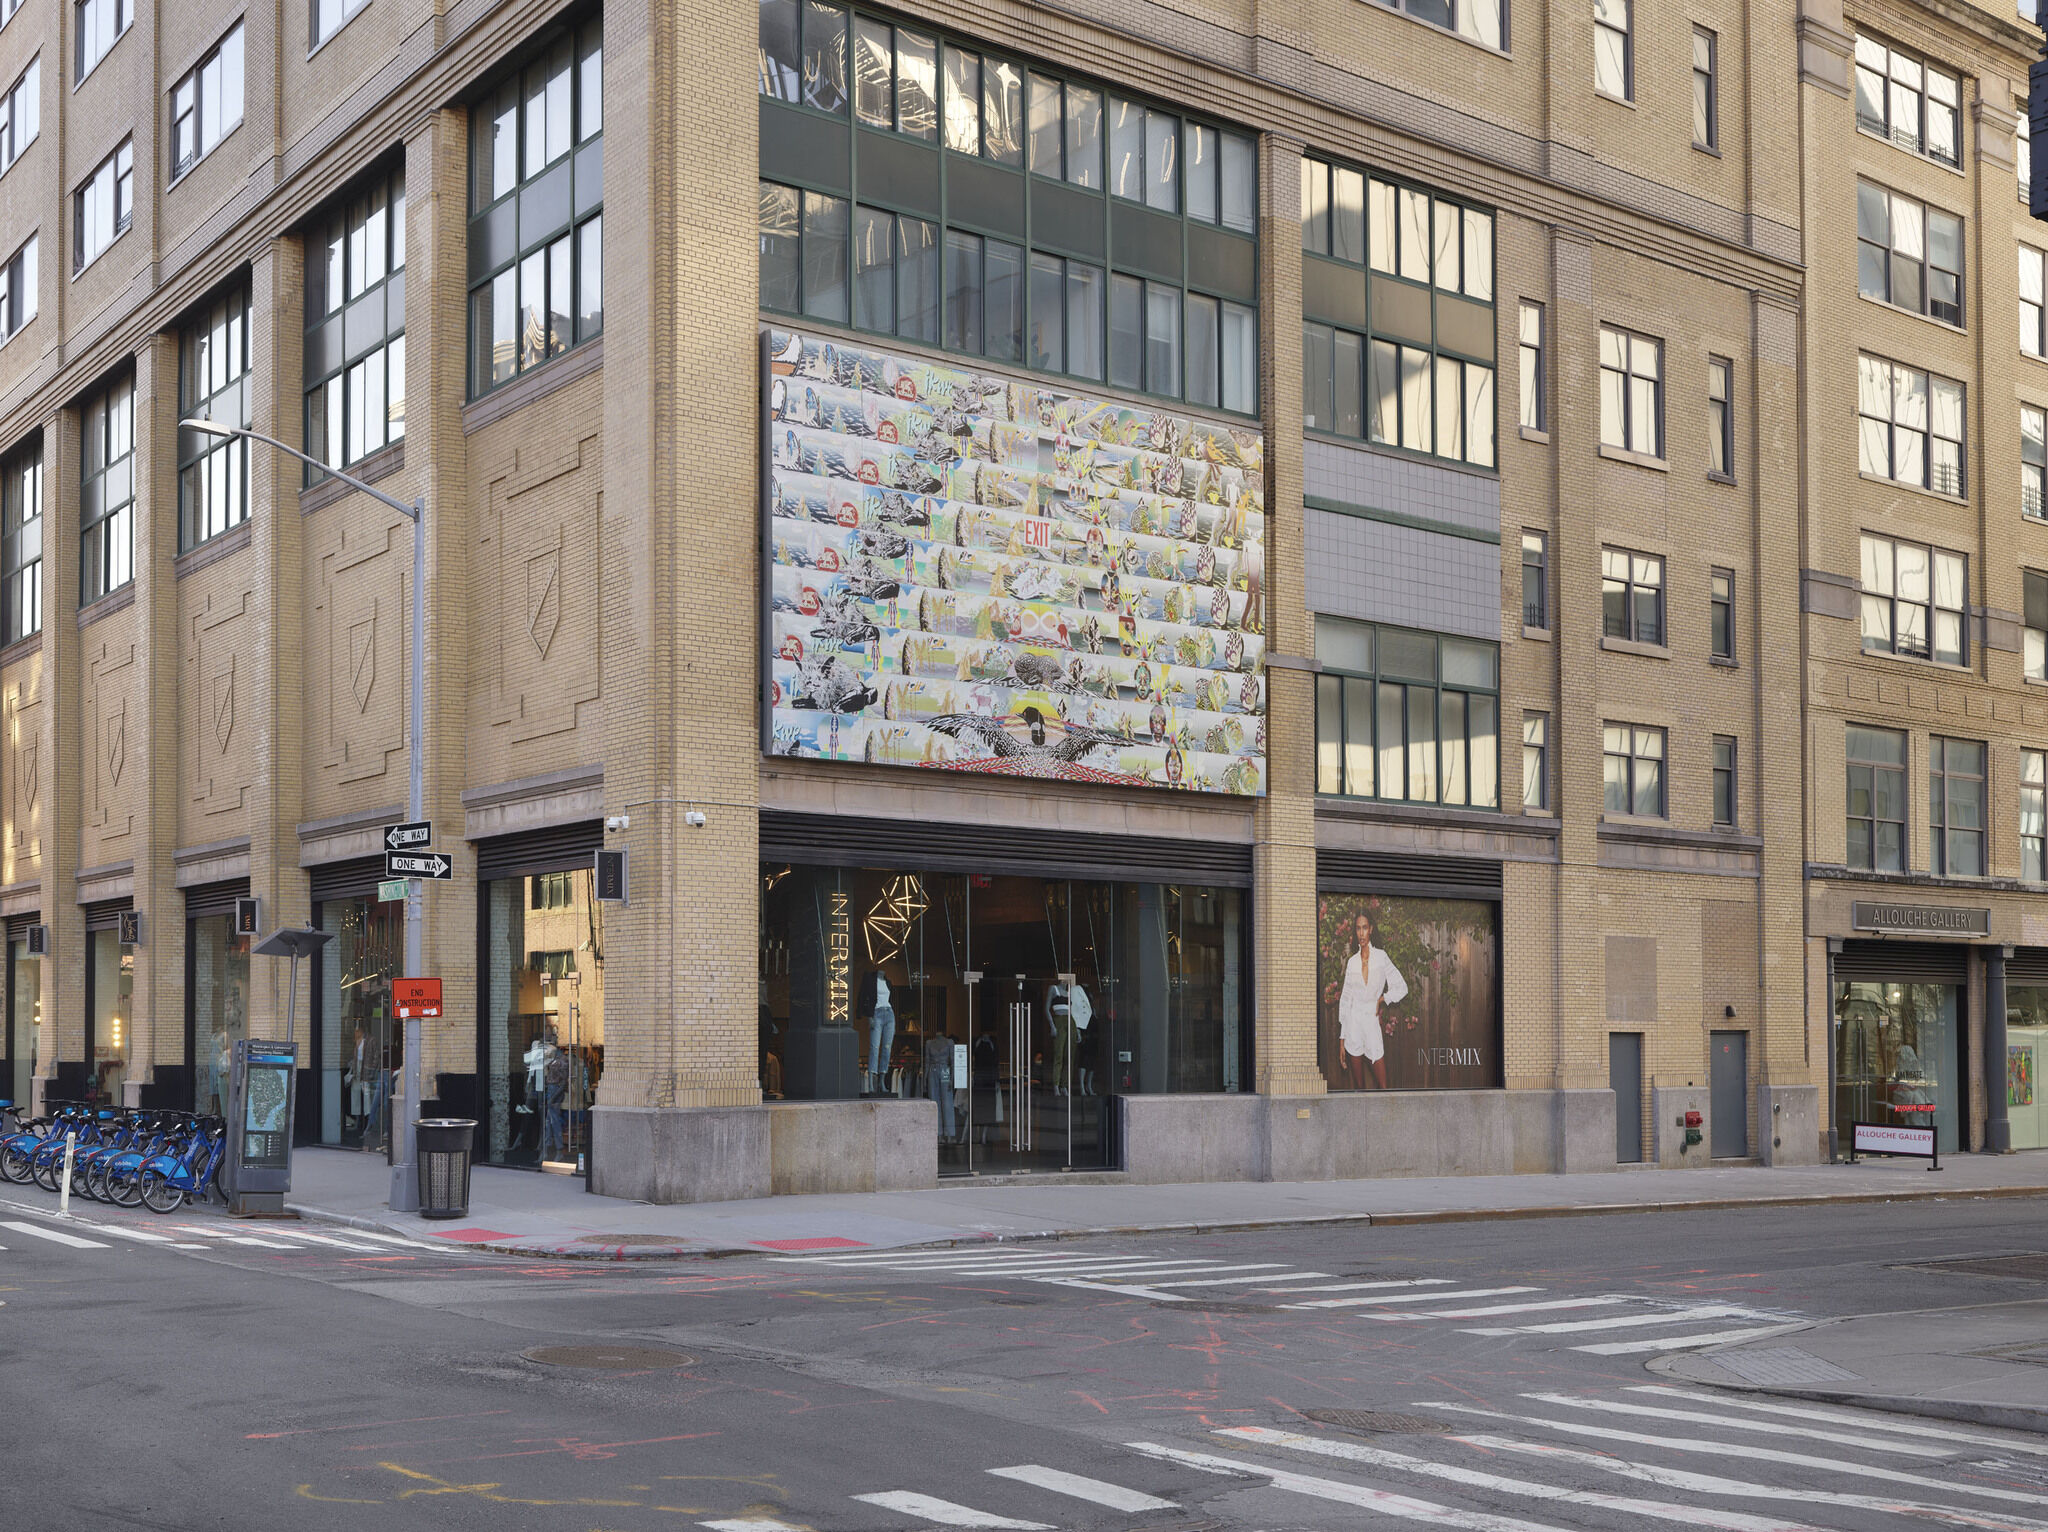 A large billboard comprised of Andrea Carlson's piece Red Exit is installed on the side of a building above two glass doors.